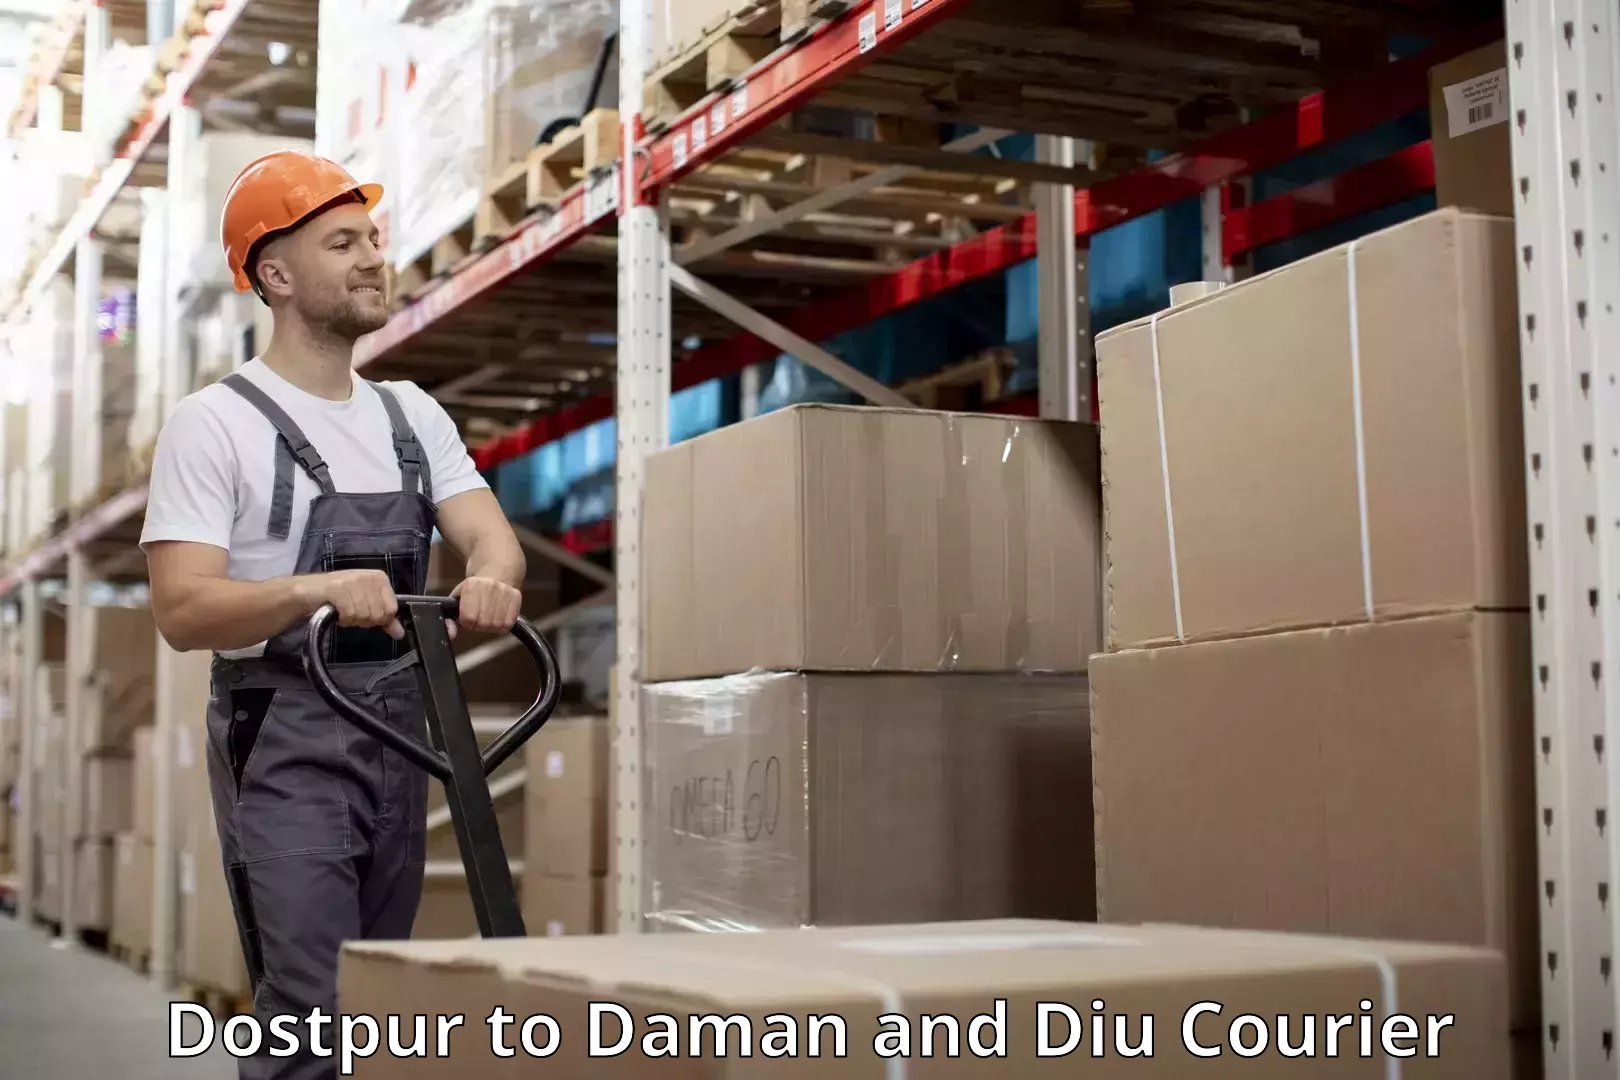 Luggage transport company Dostpur to Daman and Diu